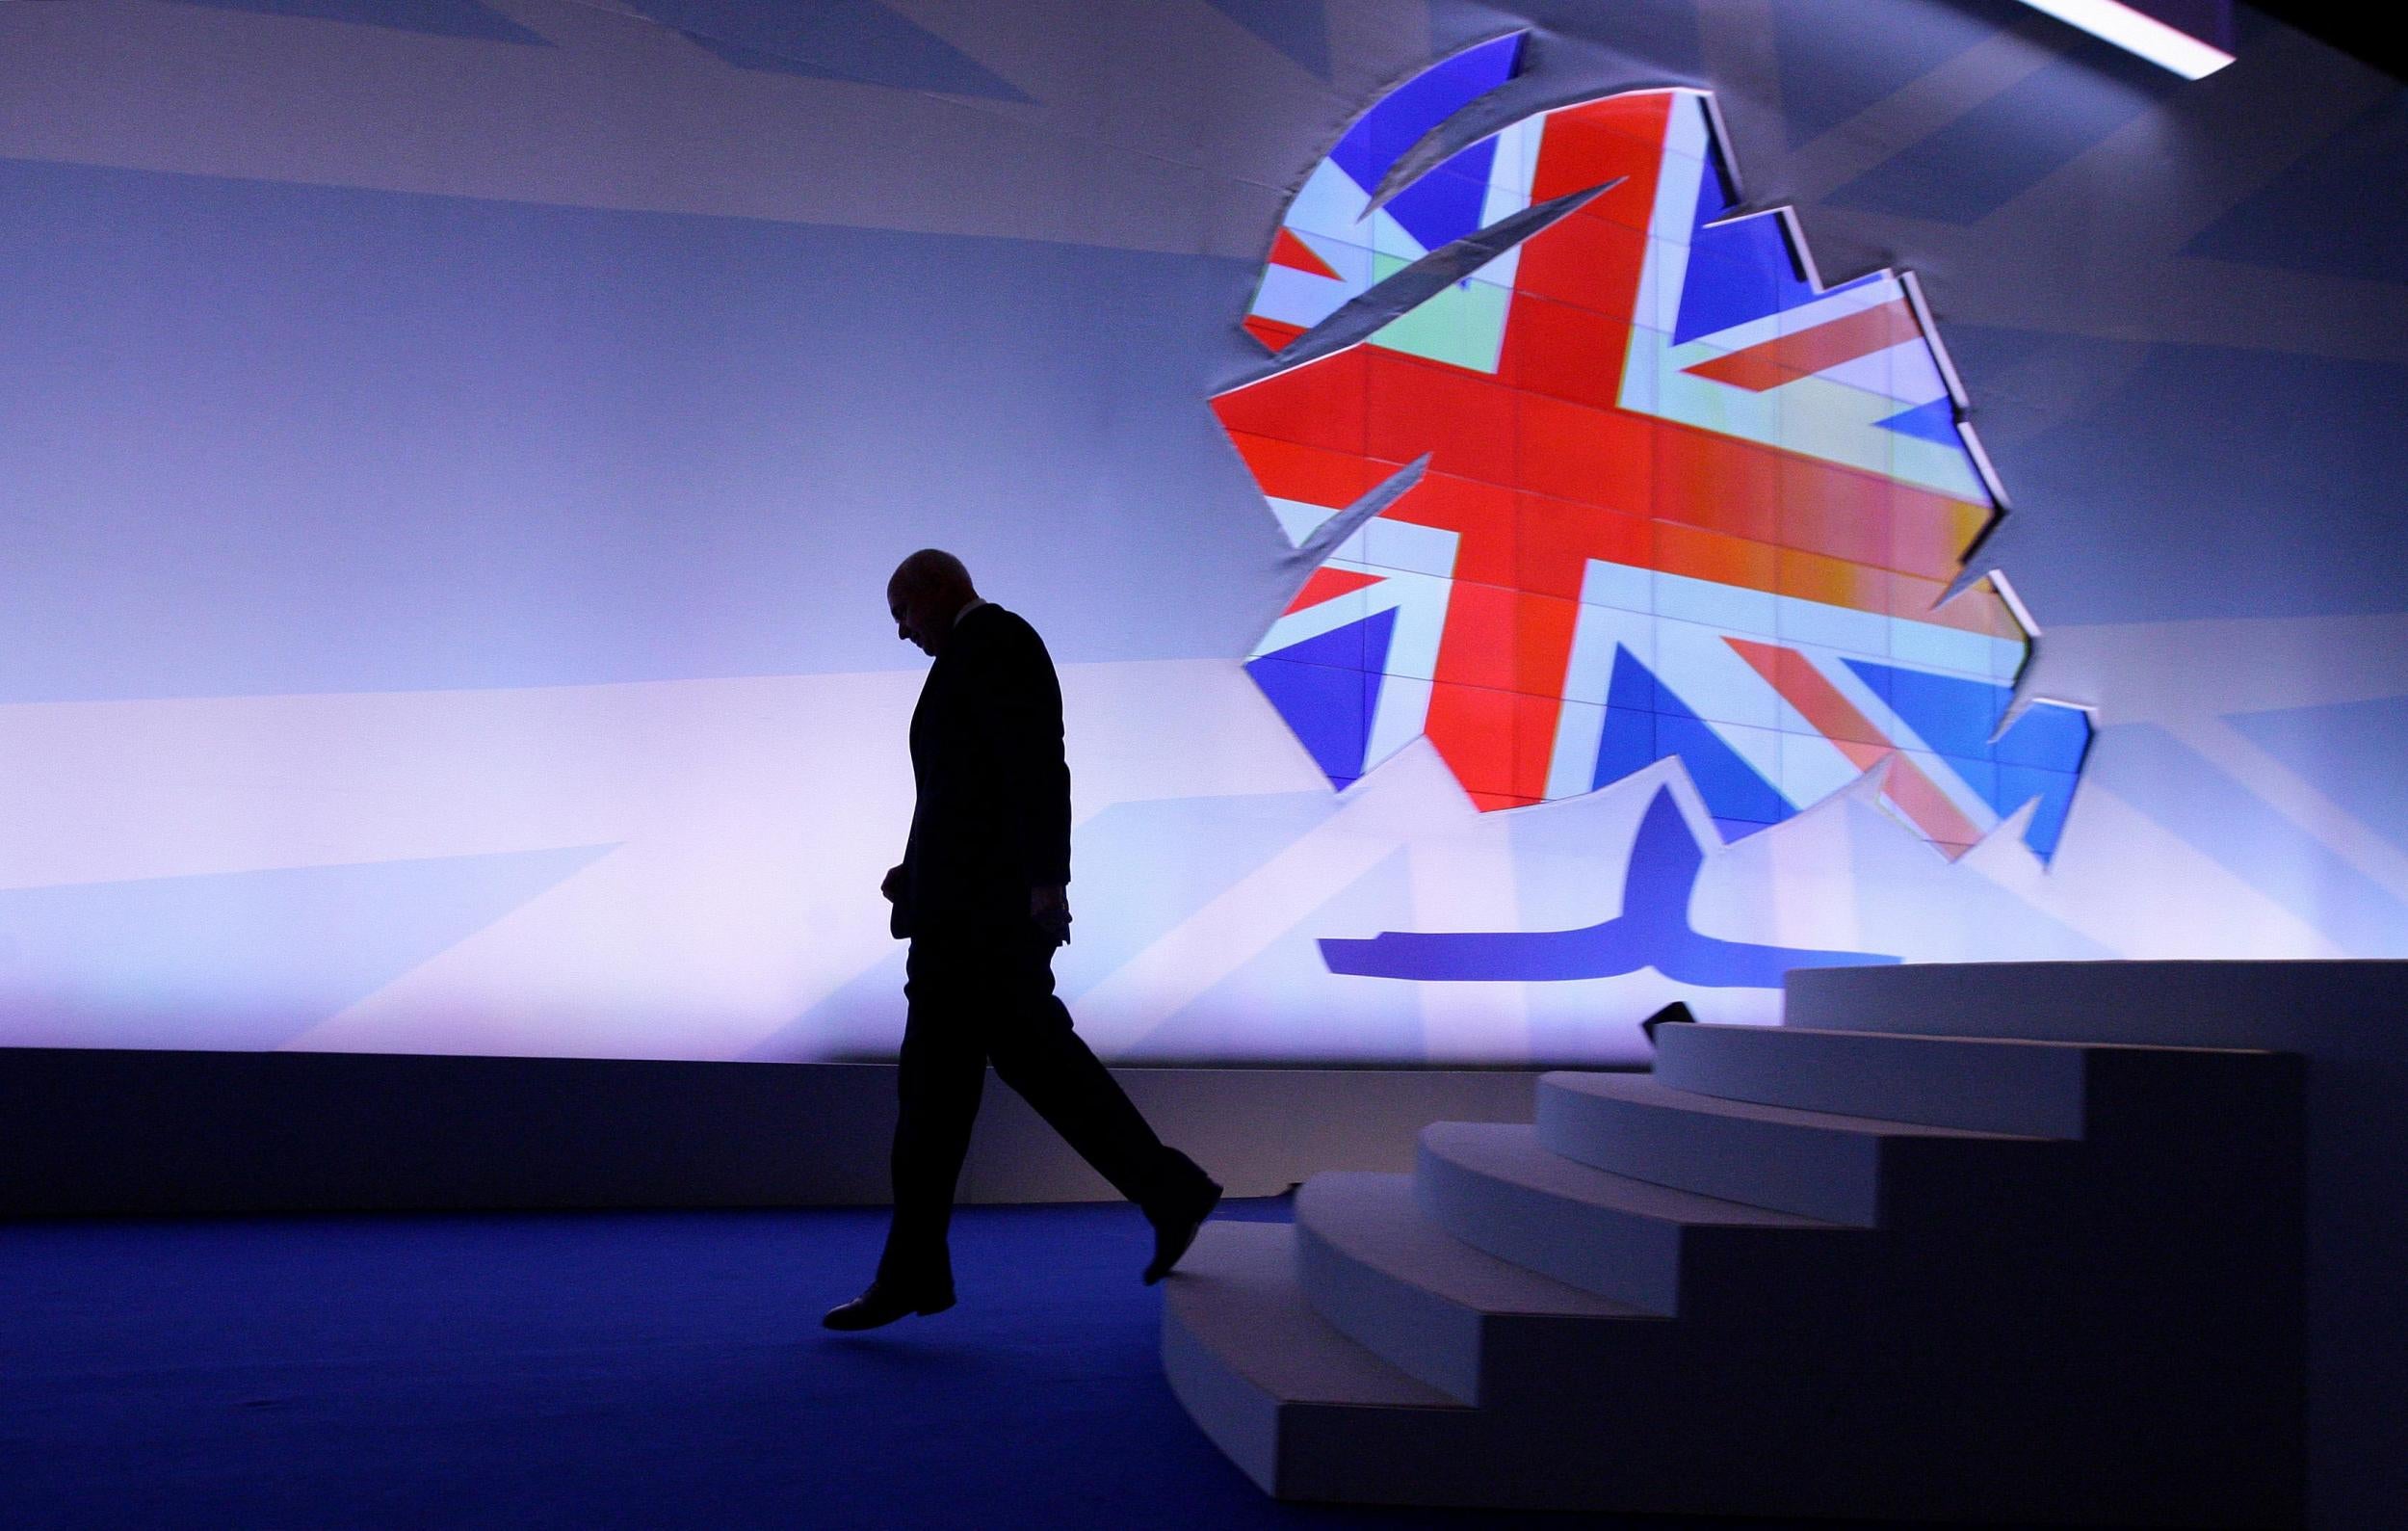 Iain Duncan Smith leaving the stage at the 2011 Conservative Party Conference in Manchester